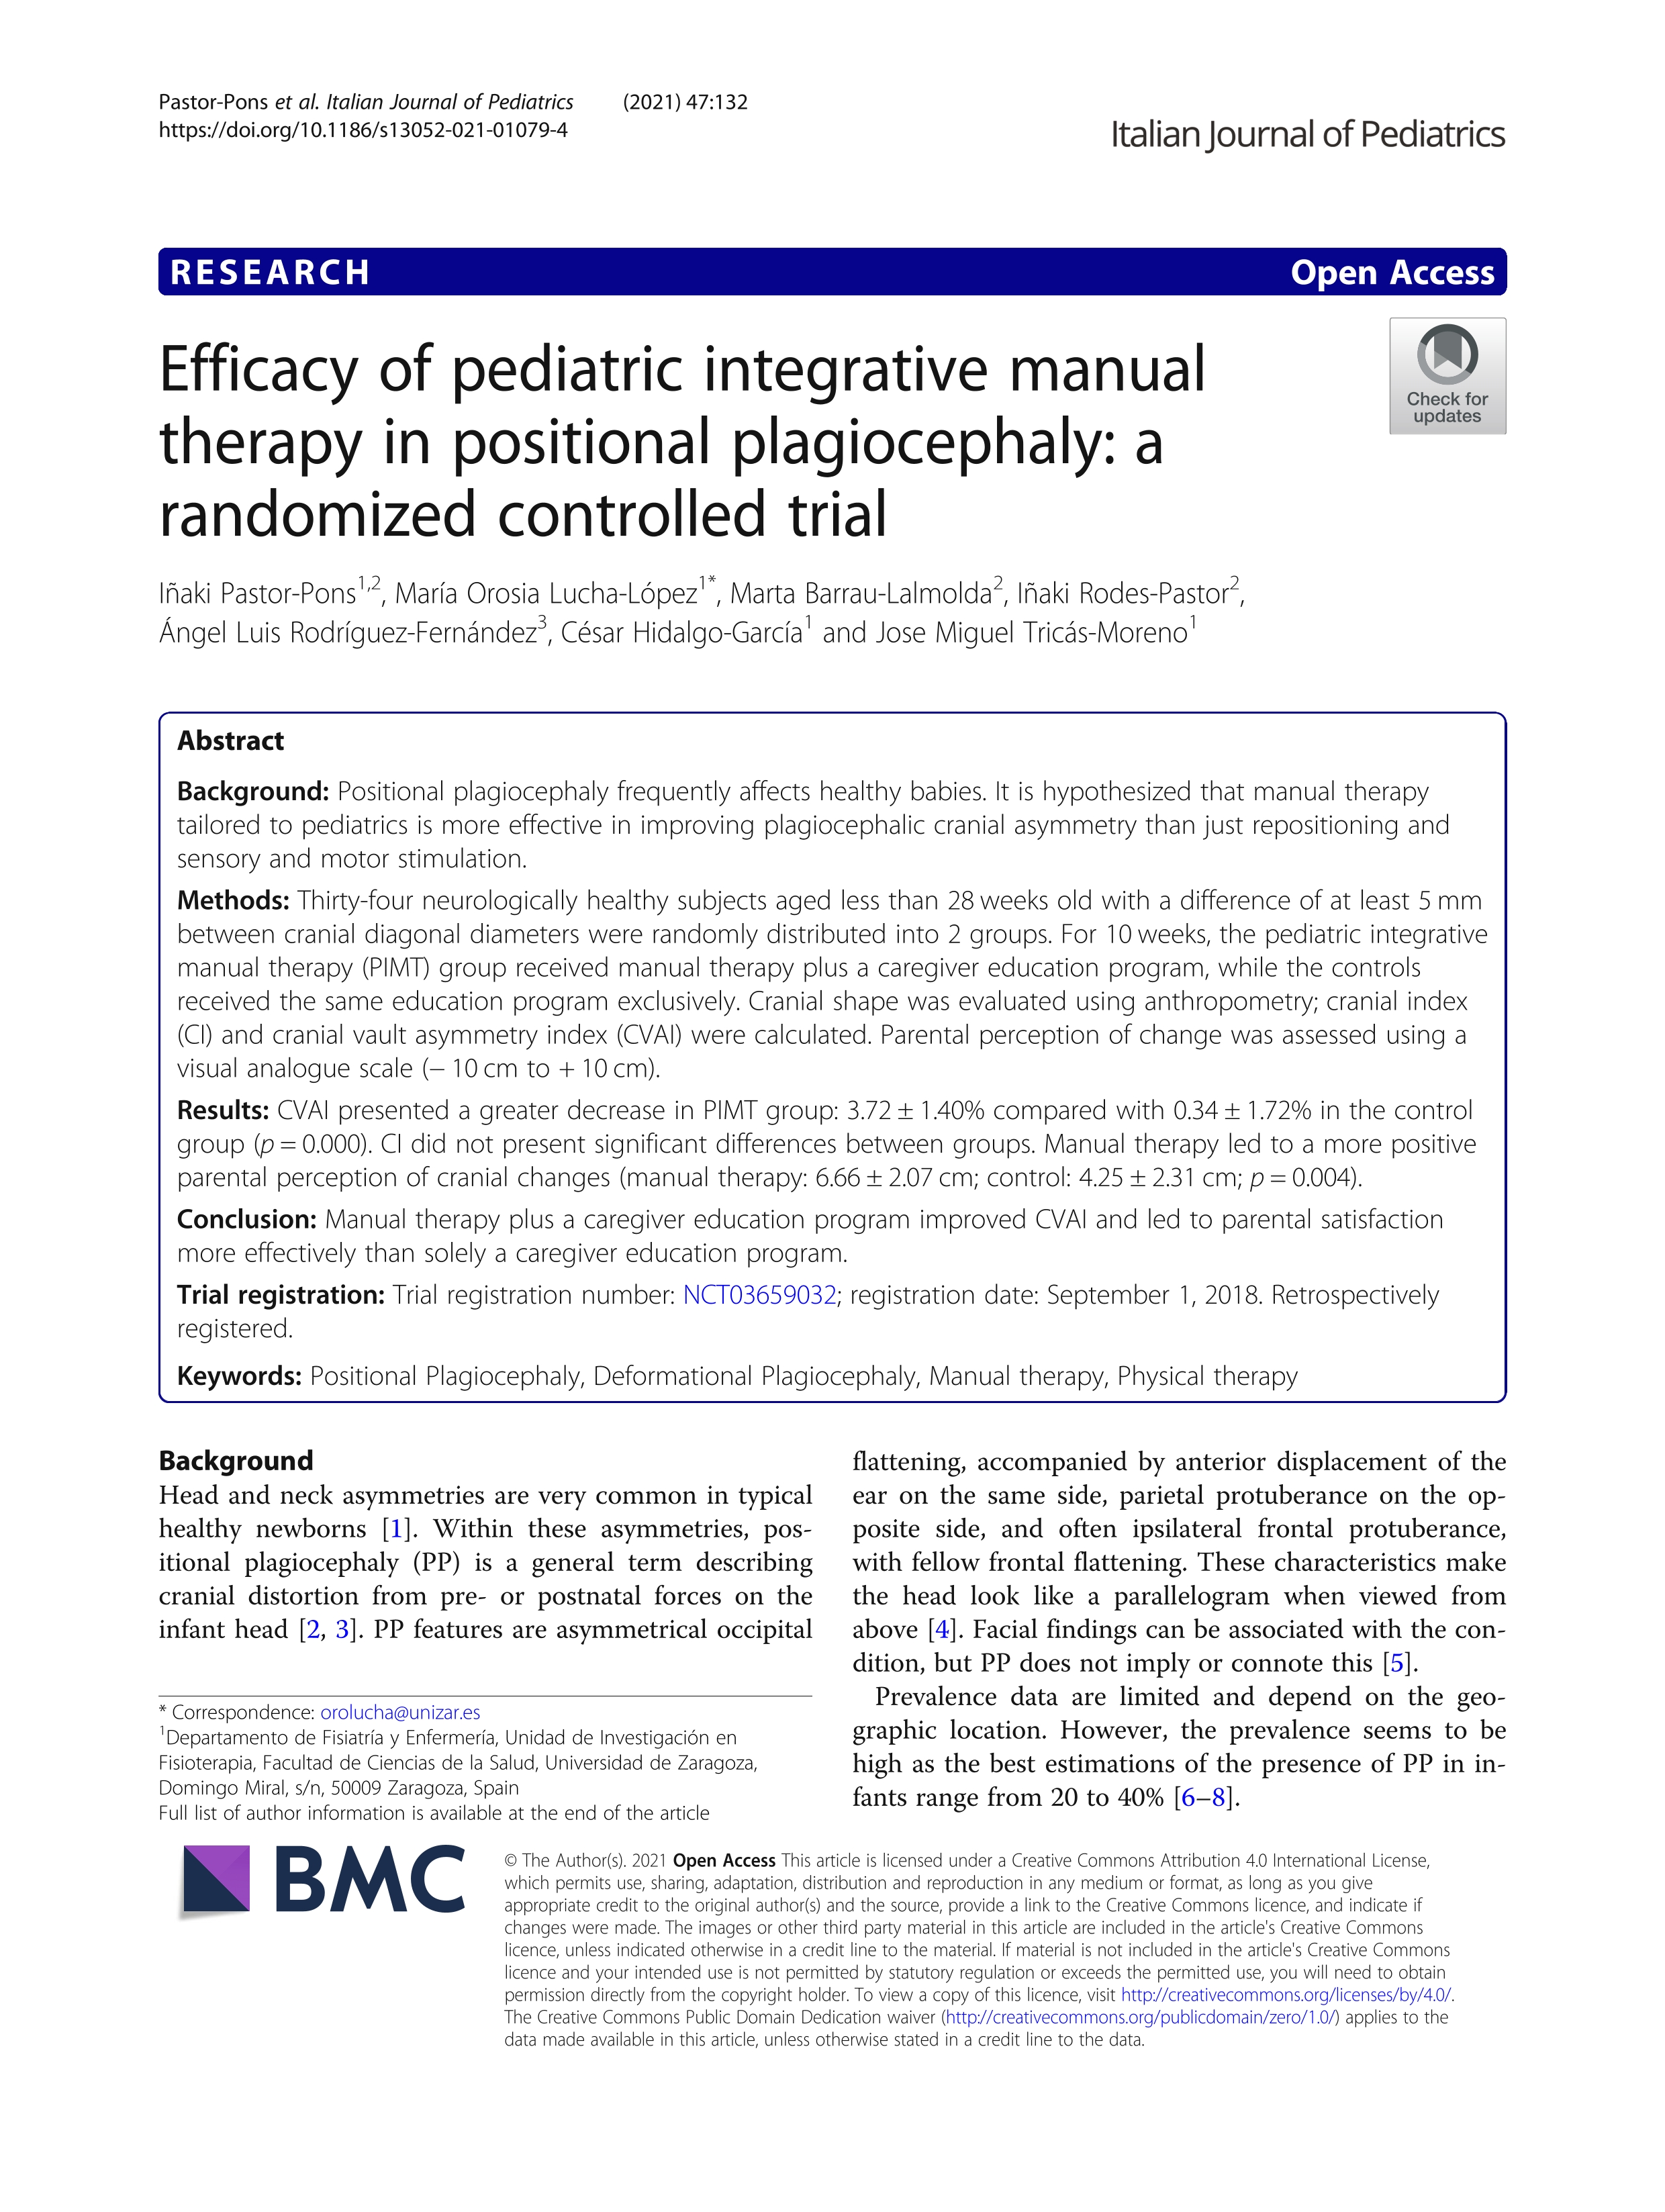 Efficacy of pediatric integrative manual therapy in positional plagiocephaly: a randomized controlled trial